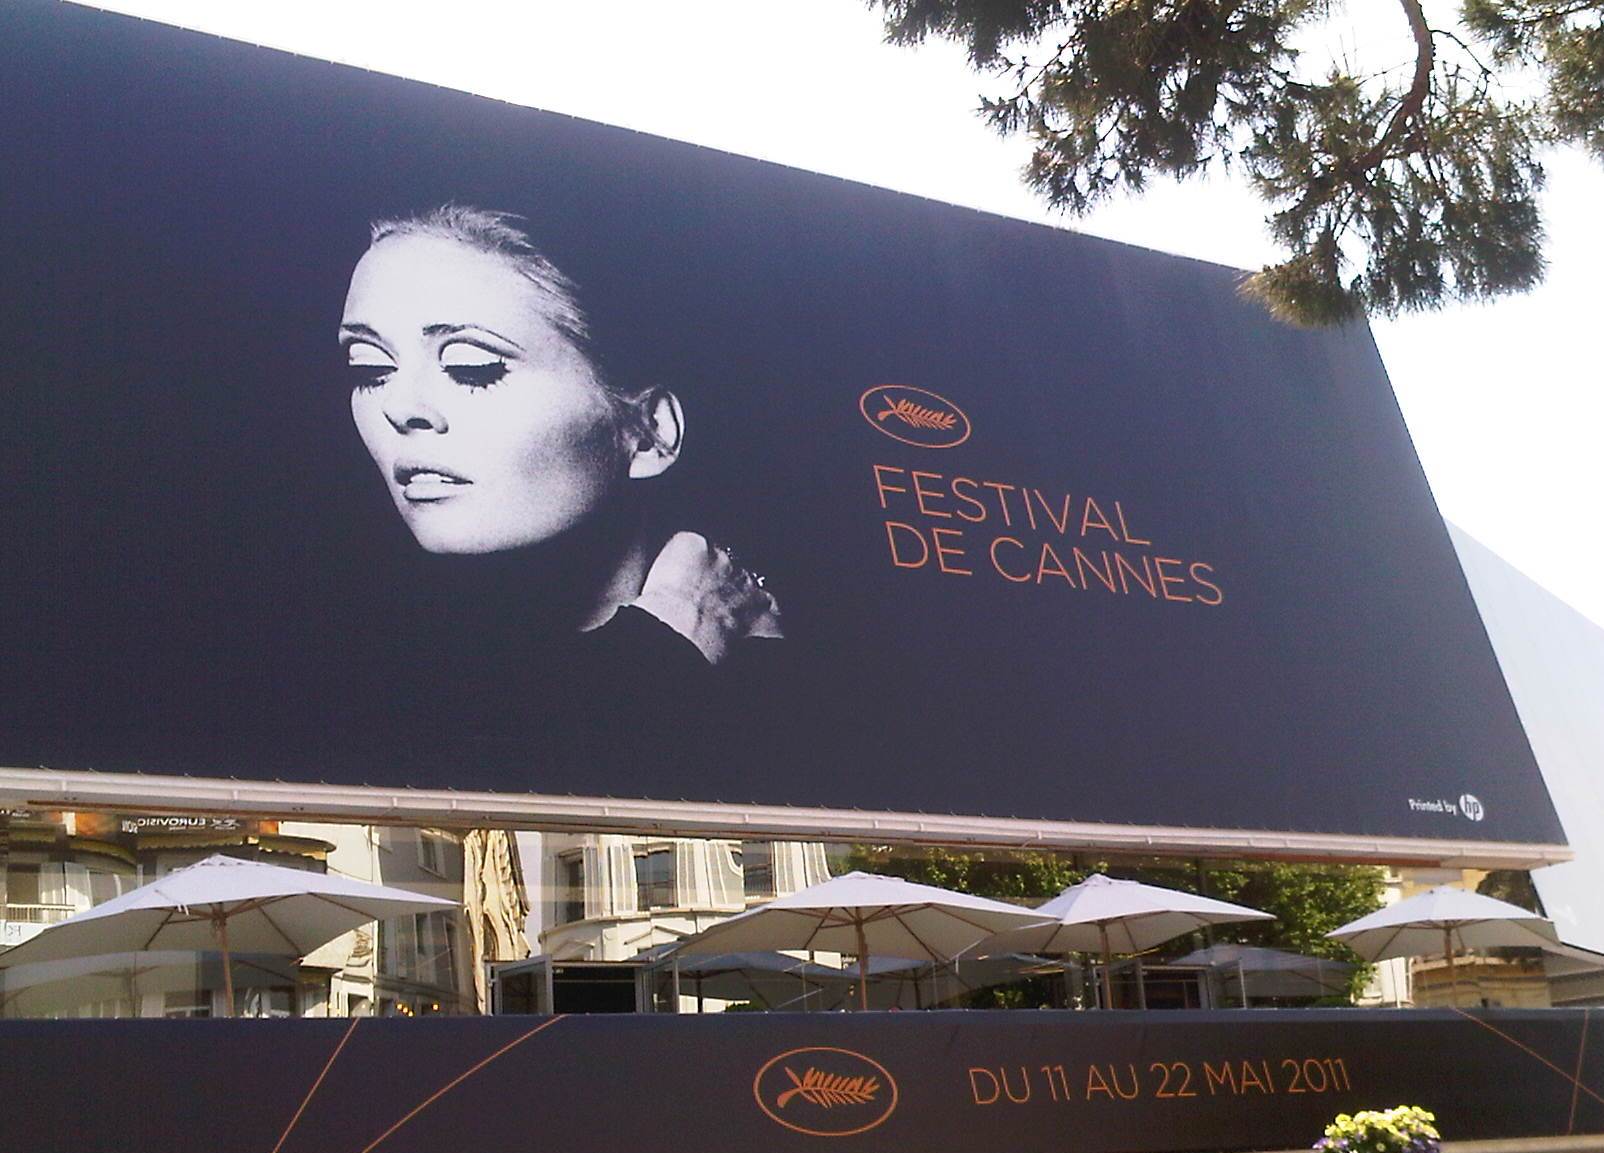 cannes_banner_20110510180419